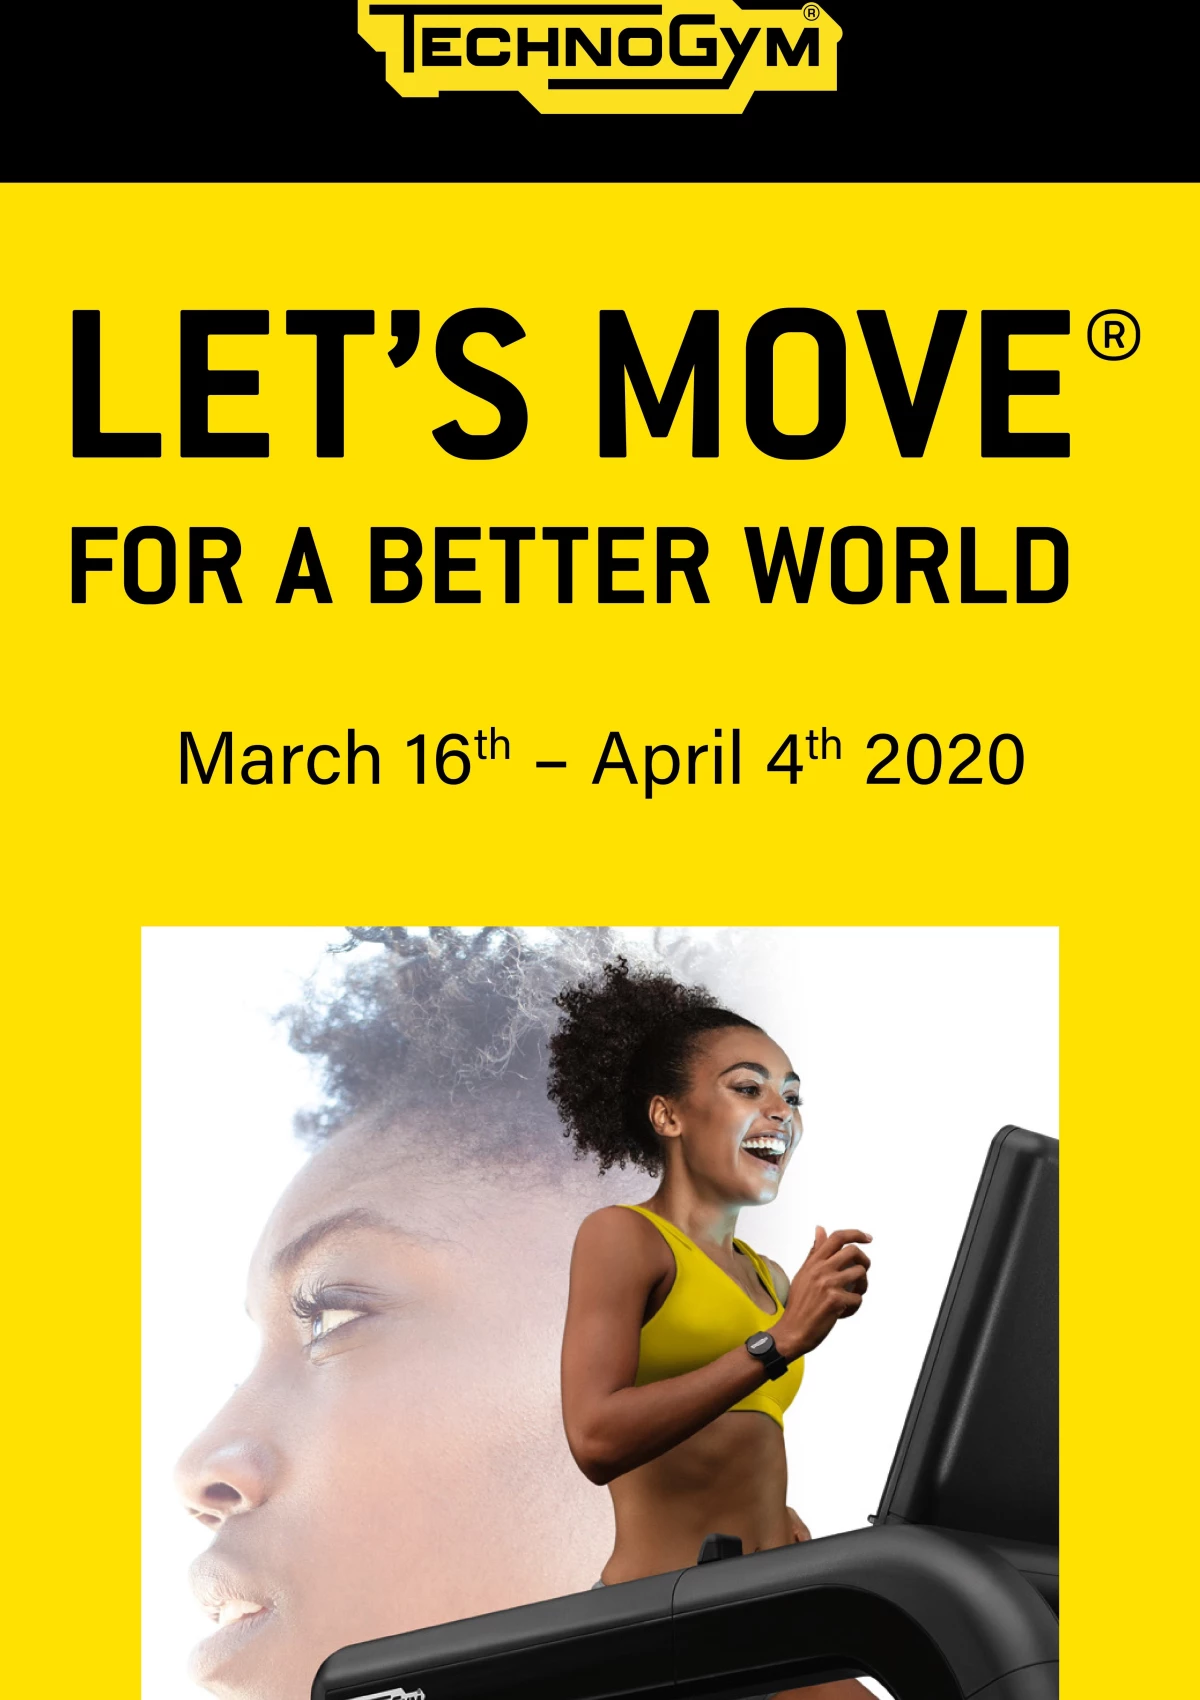 LET'S MOVE for a better world